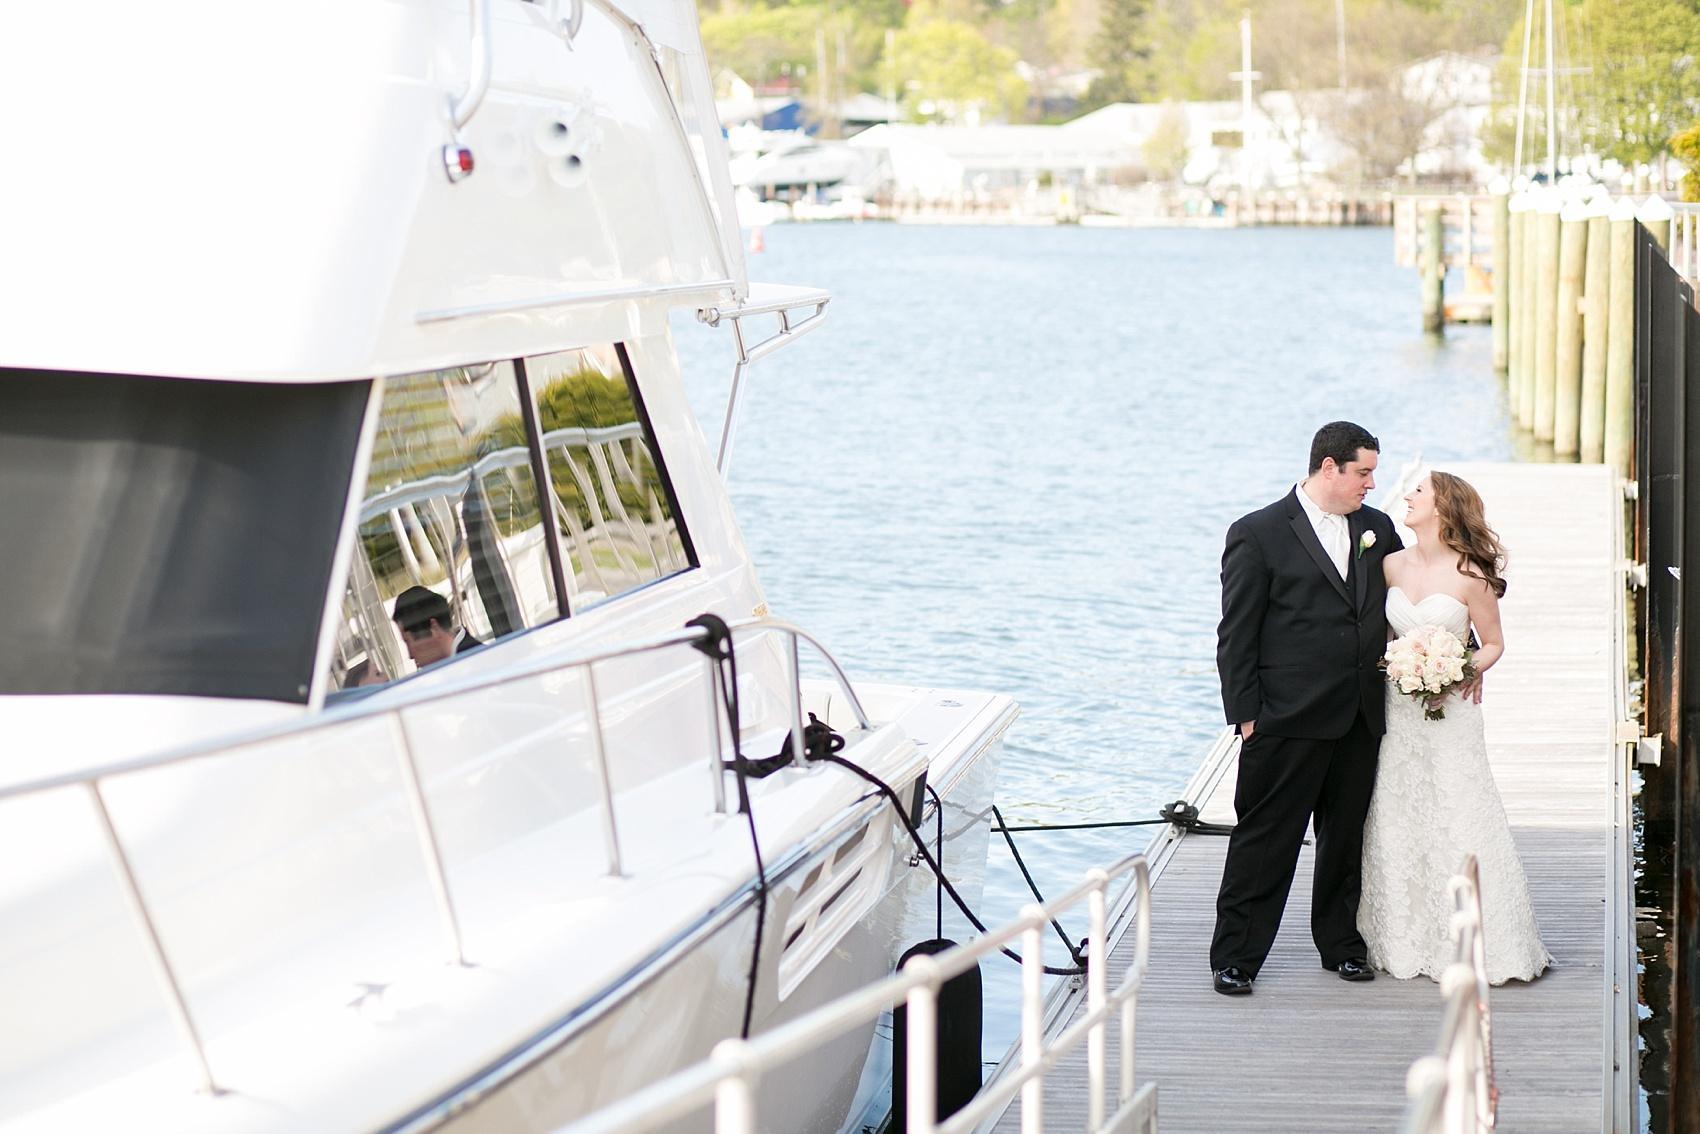 Photos by Mikkel Paige Photography for a wedding at Harbor Club on Long Island. Waterfront bride and groom yacht portraits.